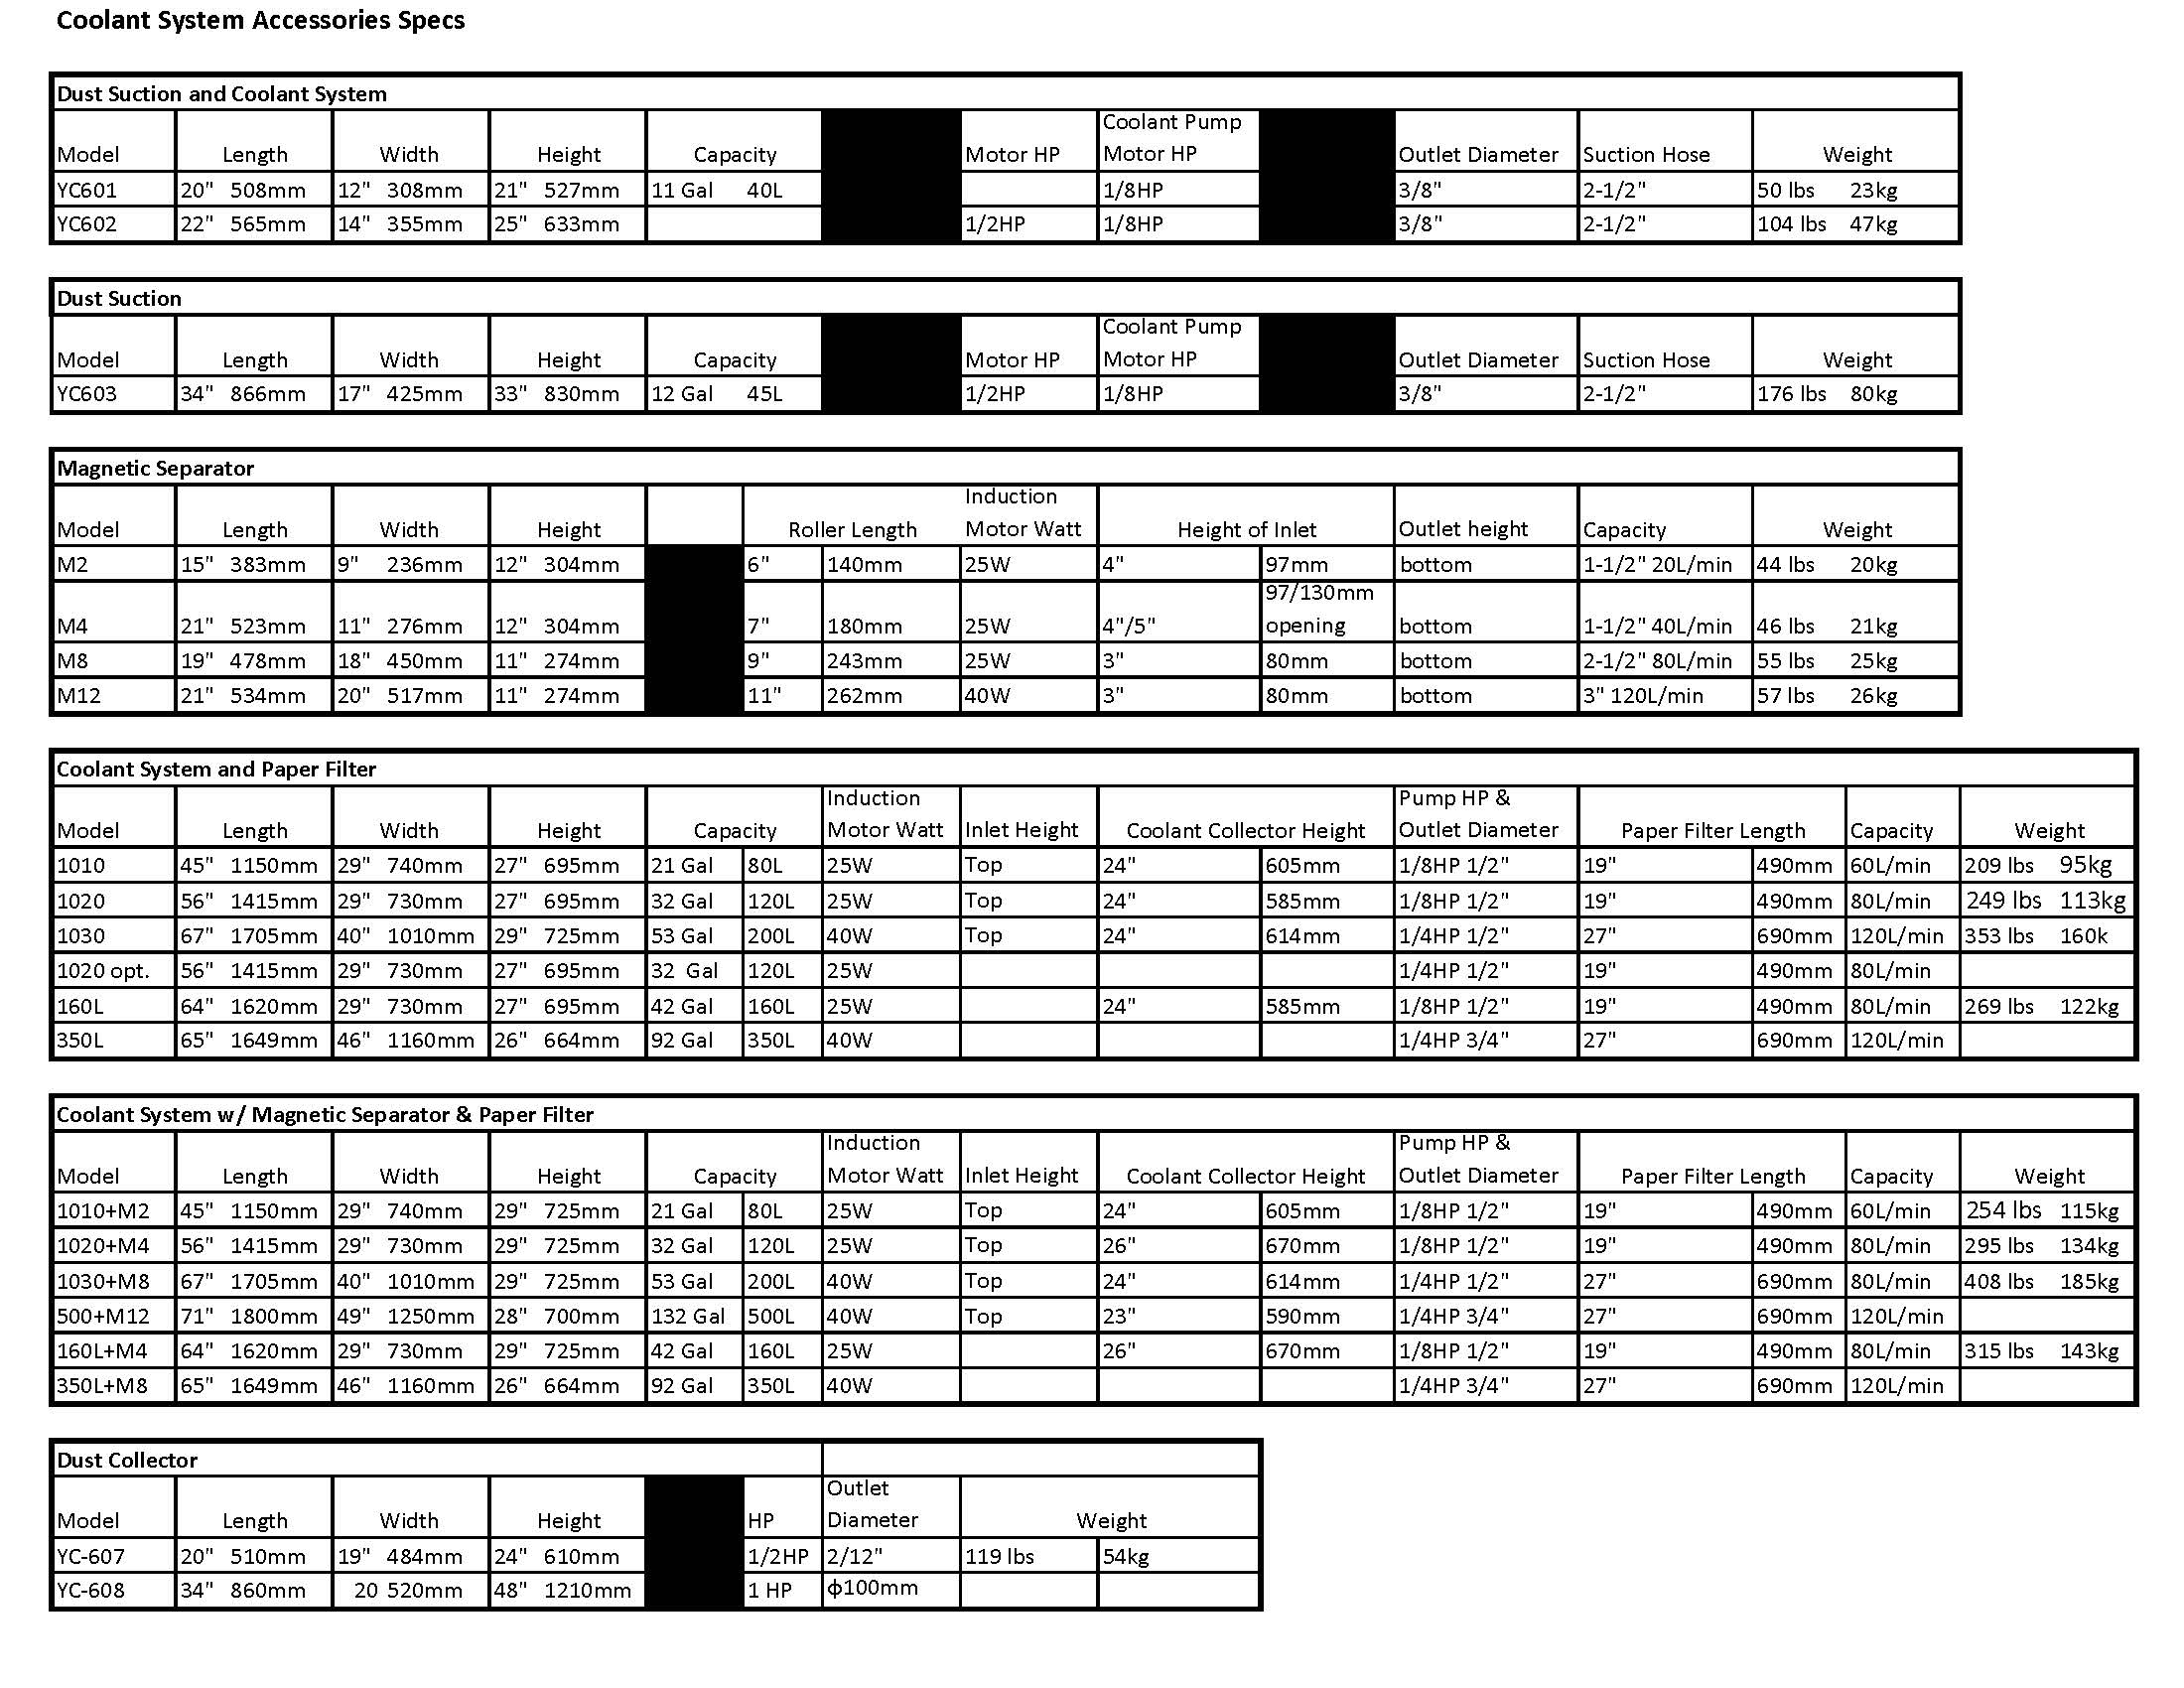 Coolant Specification Chart